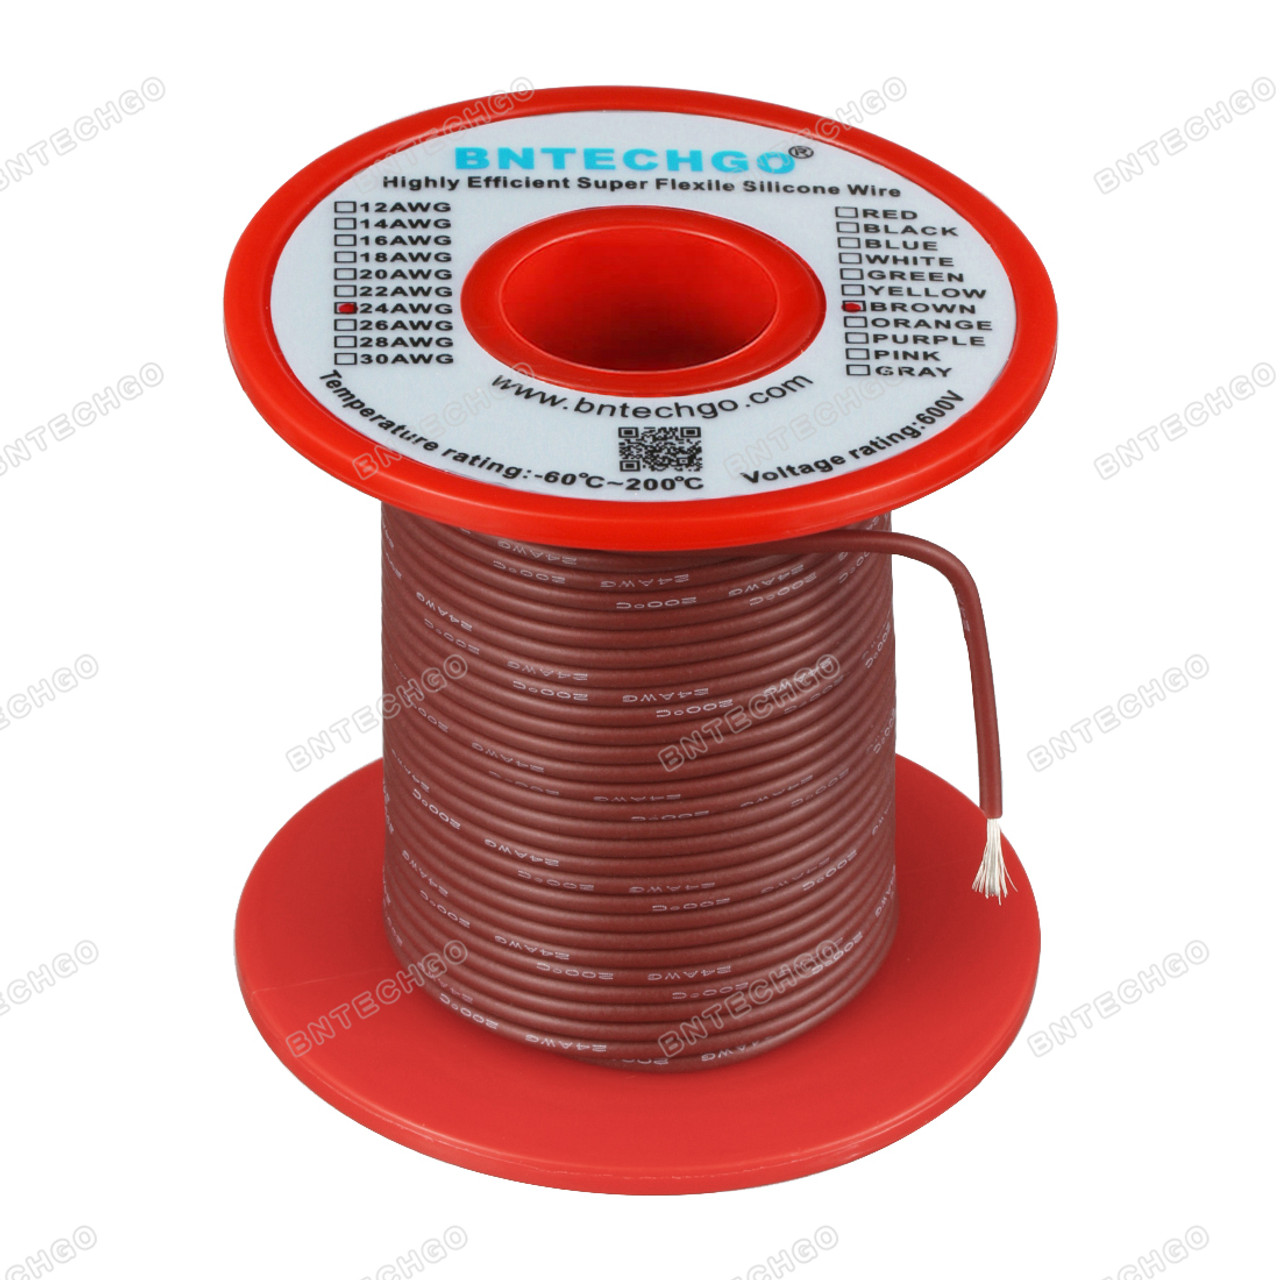 BNTECHGO 10 Gauge Silicone Wire Spool Black 50 feet Ultra Flexible High  Temp 200 deg C 600V 10AWG Silicone Rubber Wire 1050 Strands of Tinned  Copper